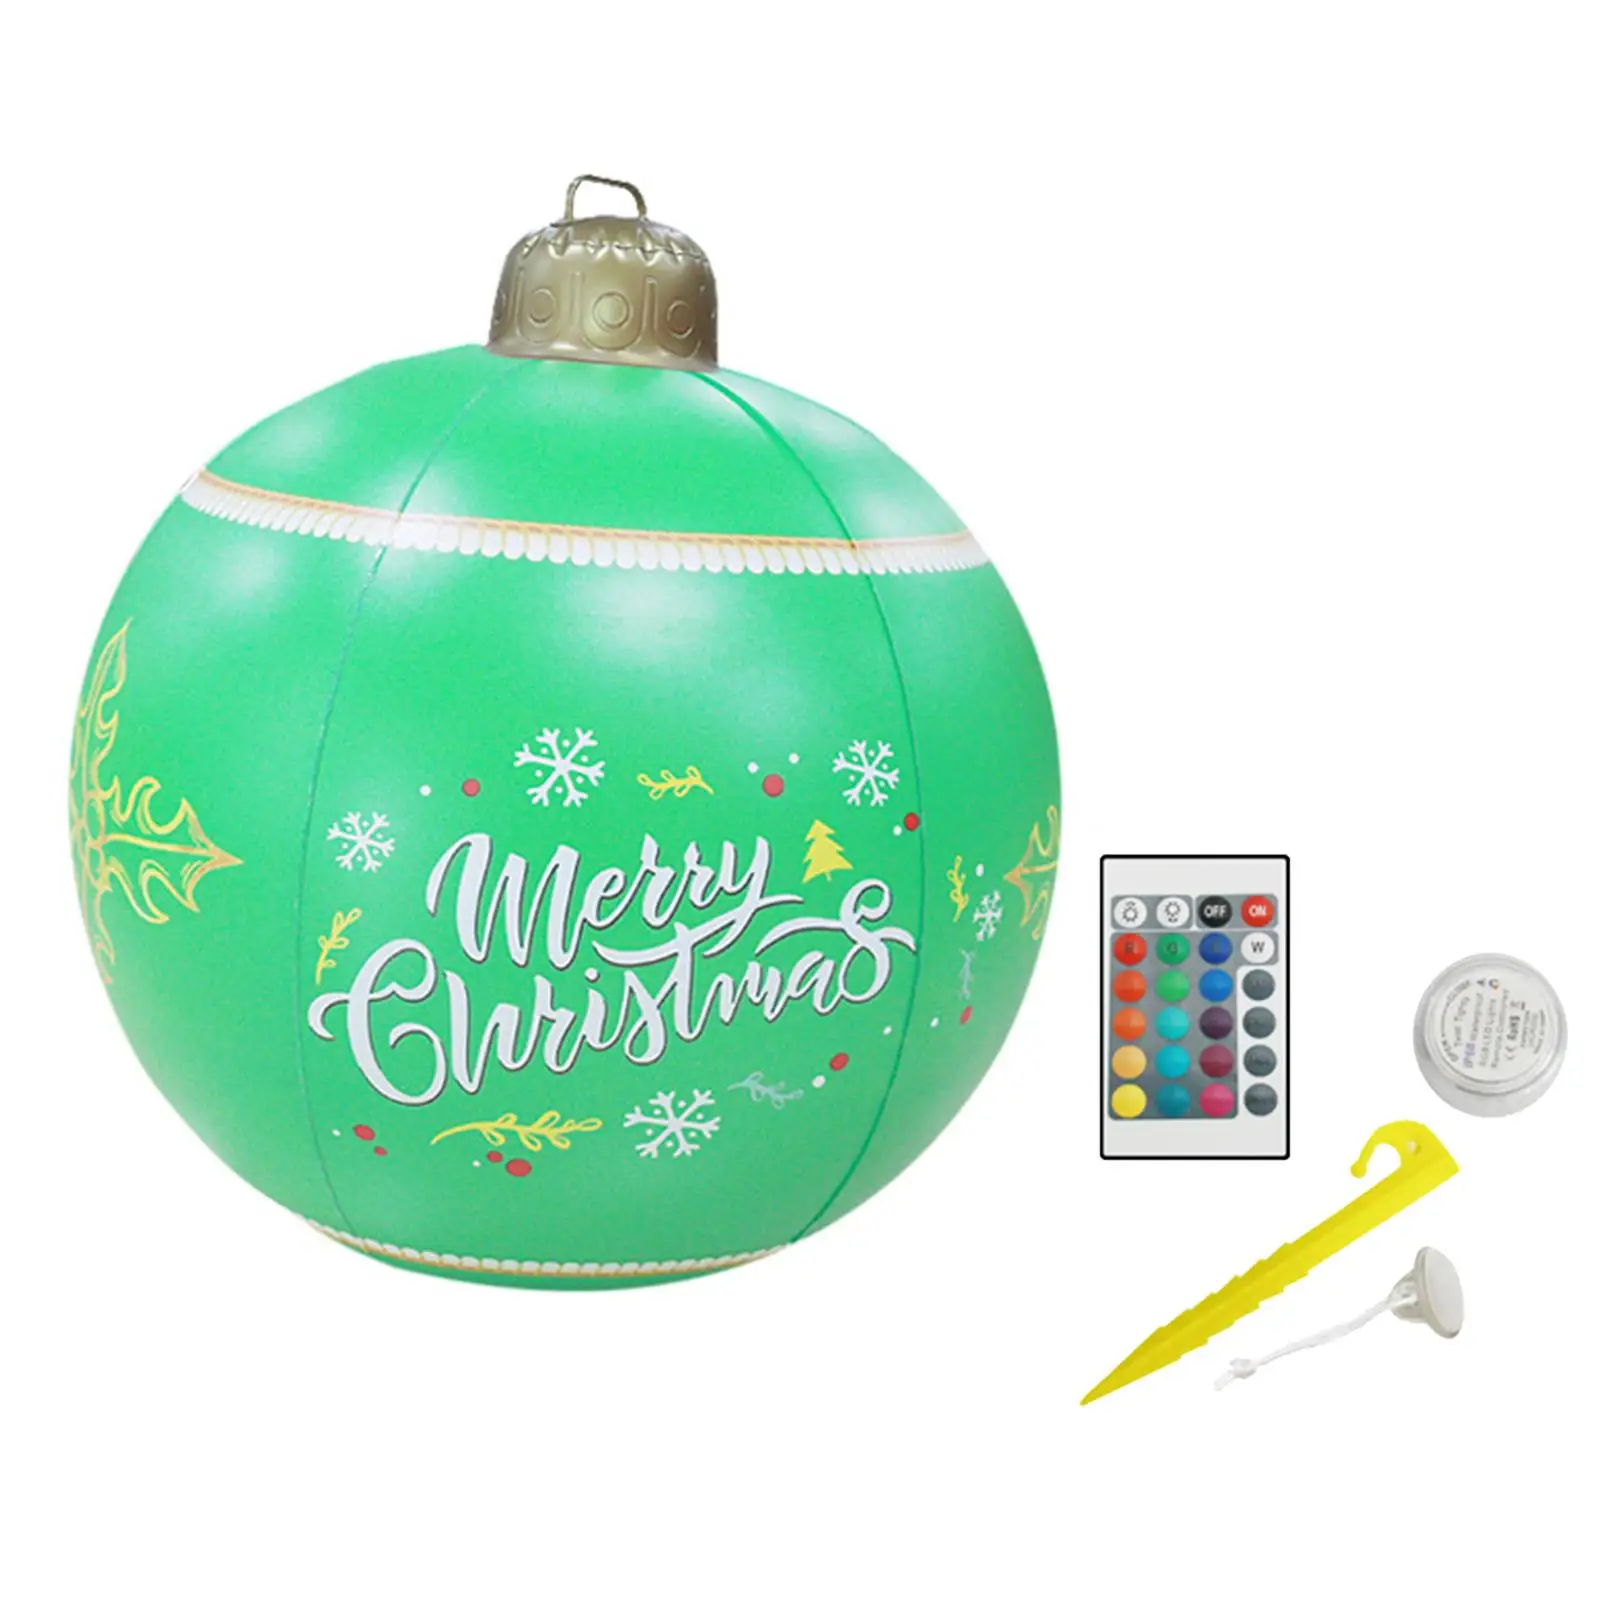 LED Christmas Inflatable Ball 16 Colors Adjustable PVC Hanging 60cm Remote Control Outdoor for Holiday Party New Year Lawn Yard